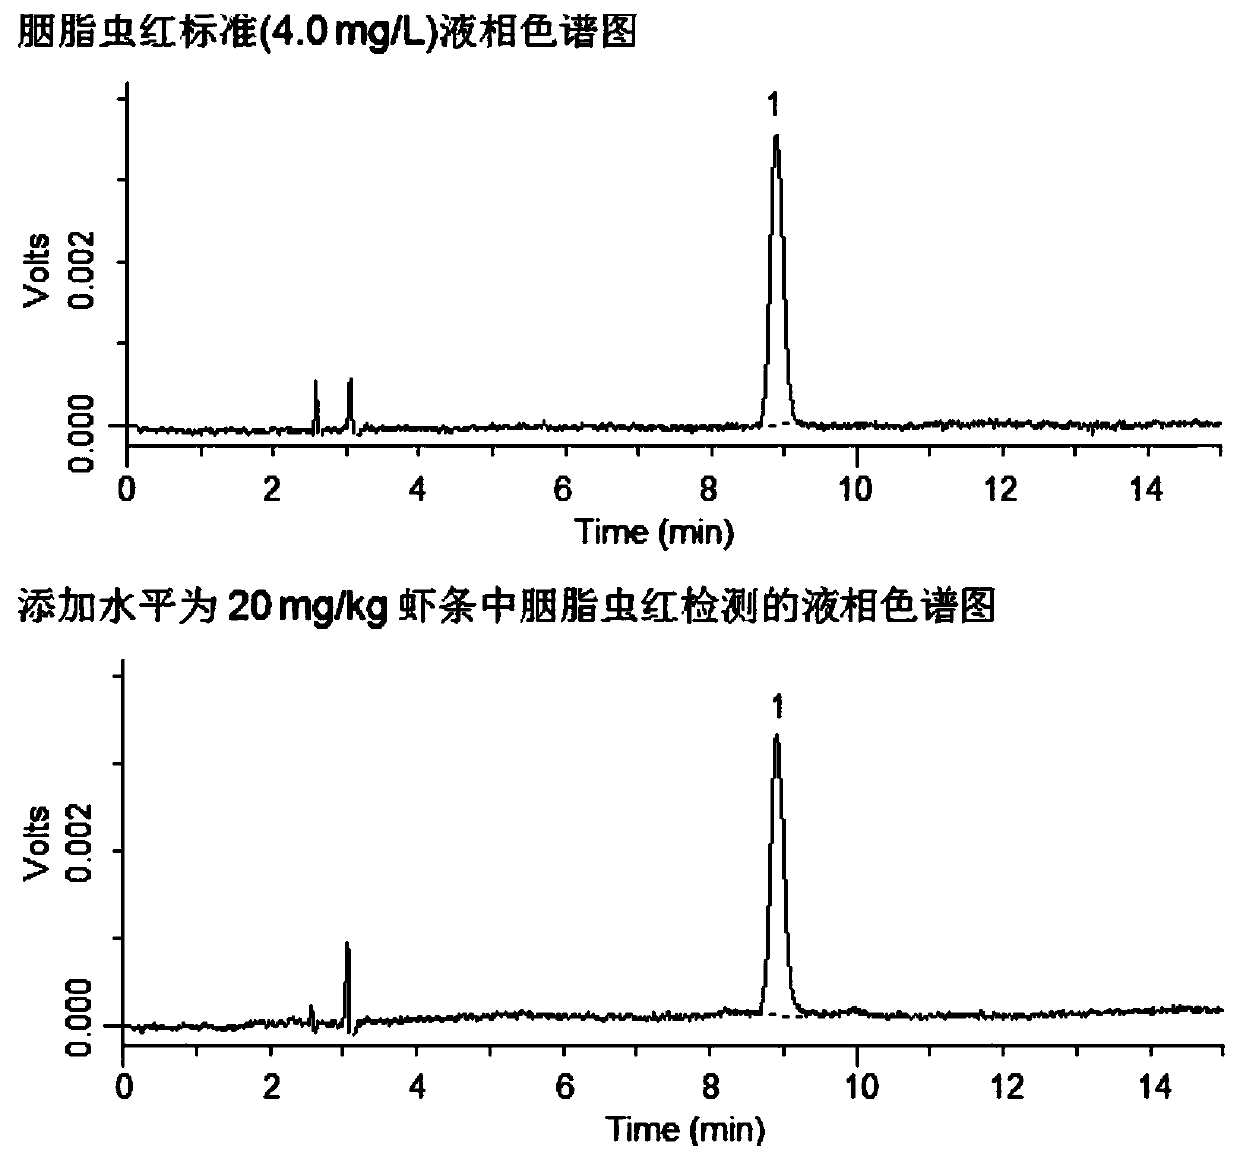 High performance liquid chromatography detection method for content of cochineal in food